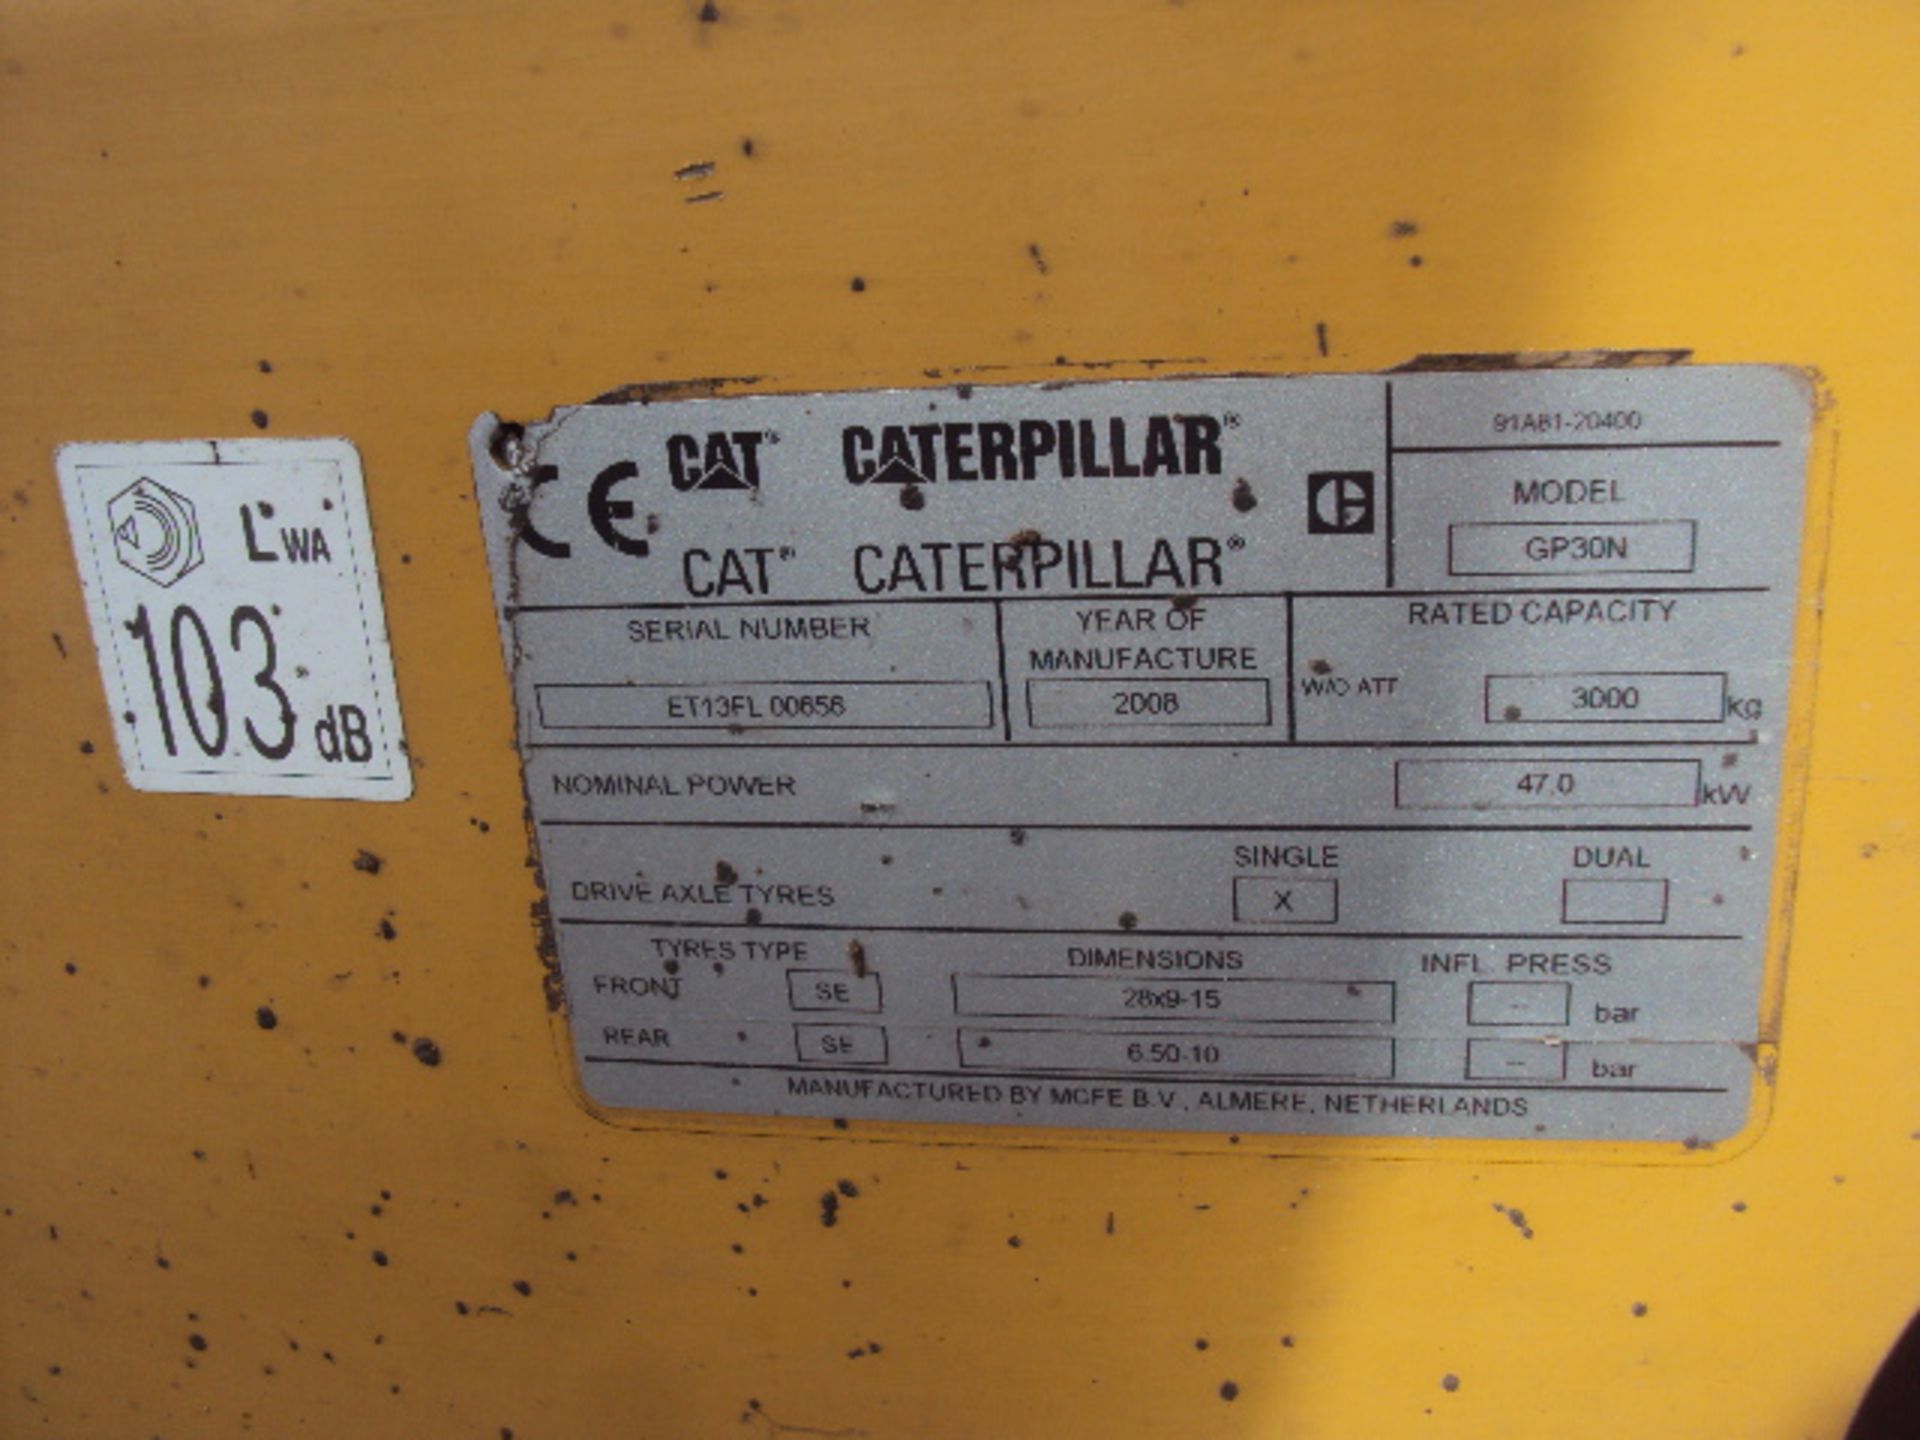 2008 CATERPILLAR GP30N 3t gas driven forklift truck S/n: ET15FL00656 (6339 recorded hours) with - Image 4 of 7